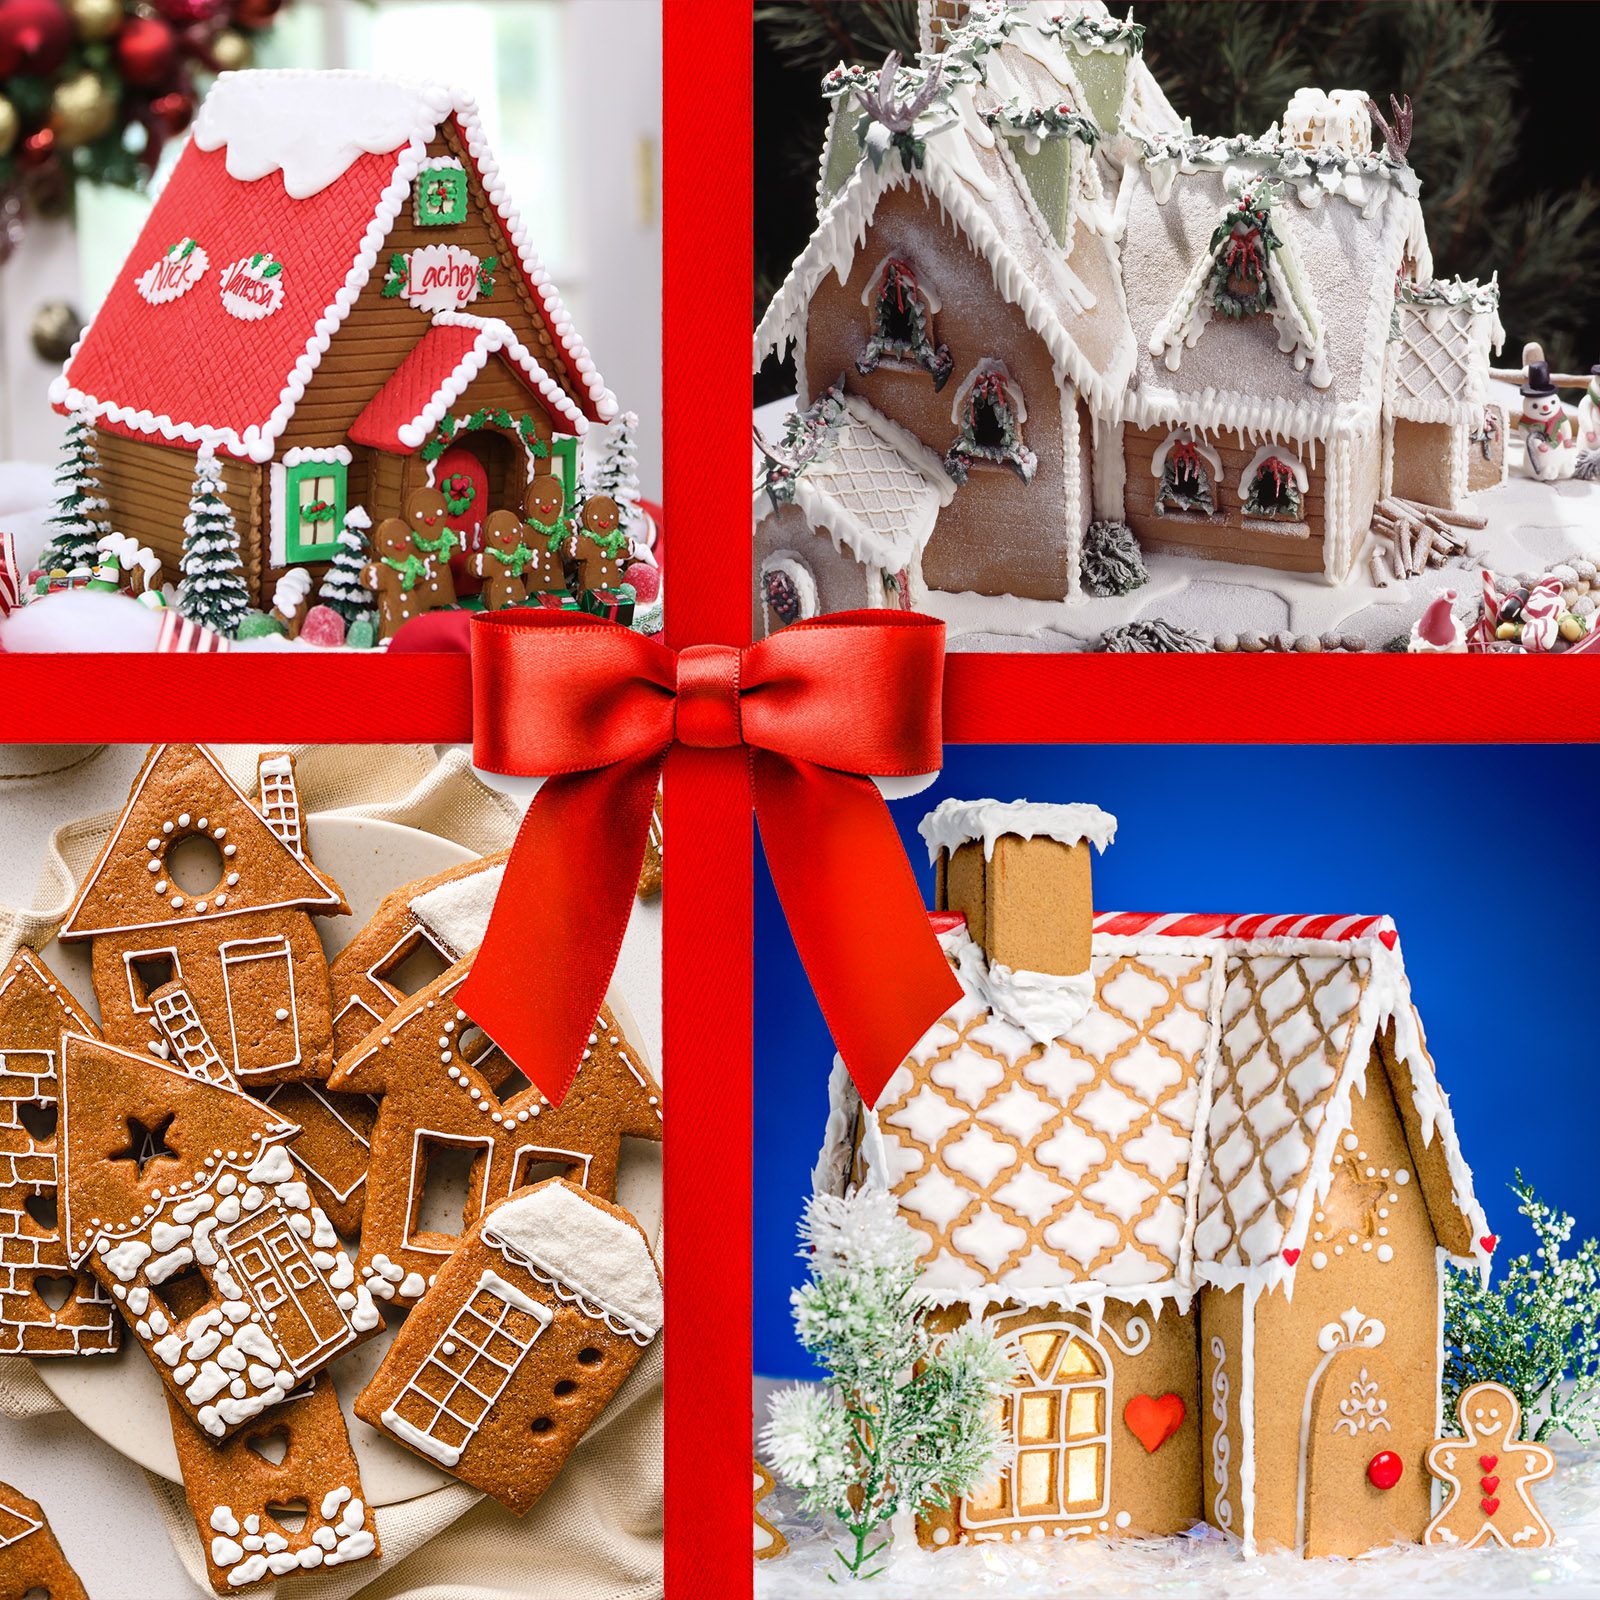 Every Gingerbread House Decorating Tool You Could Possibly Need